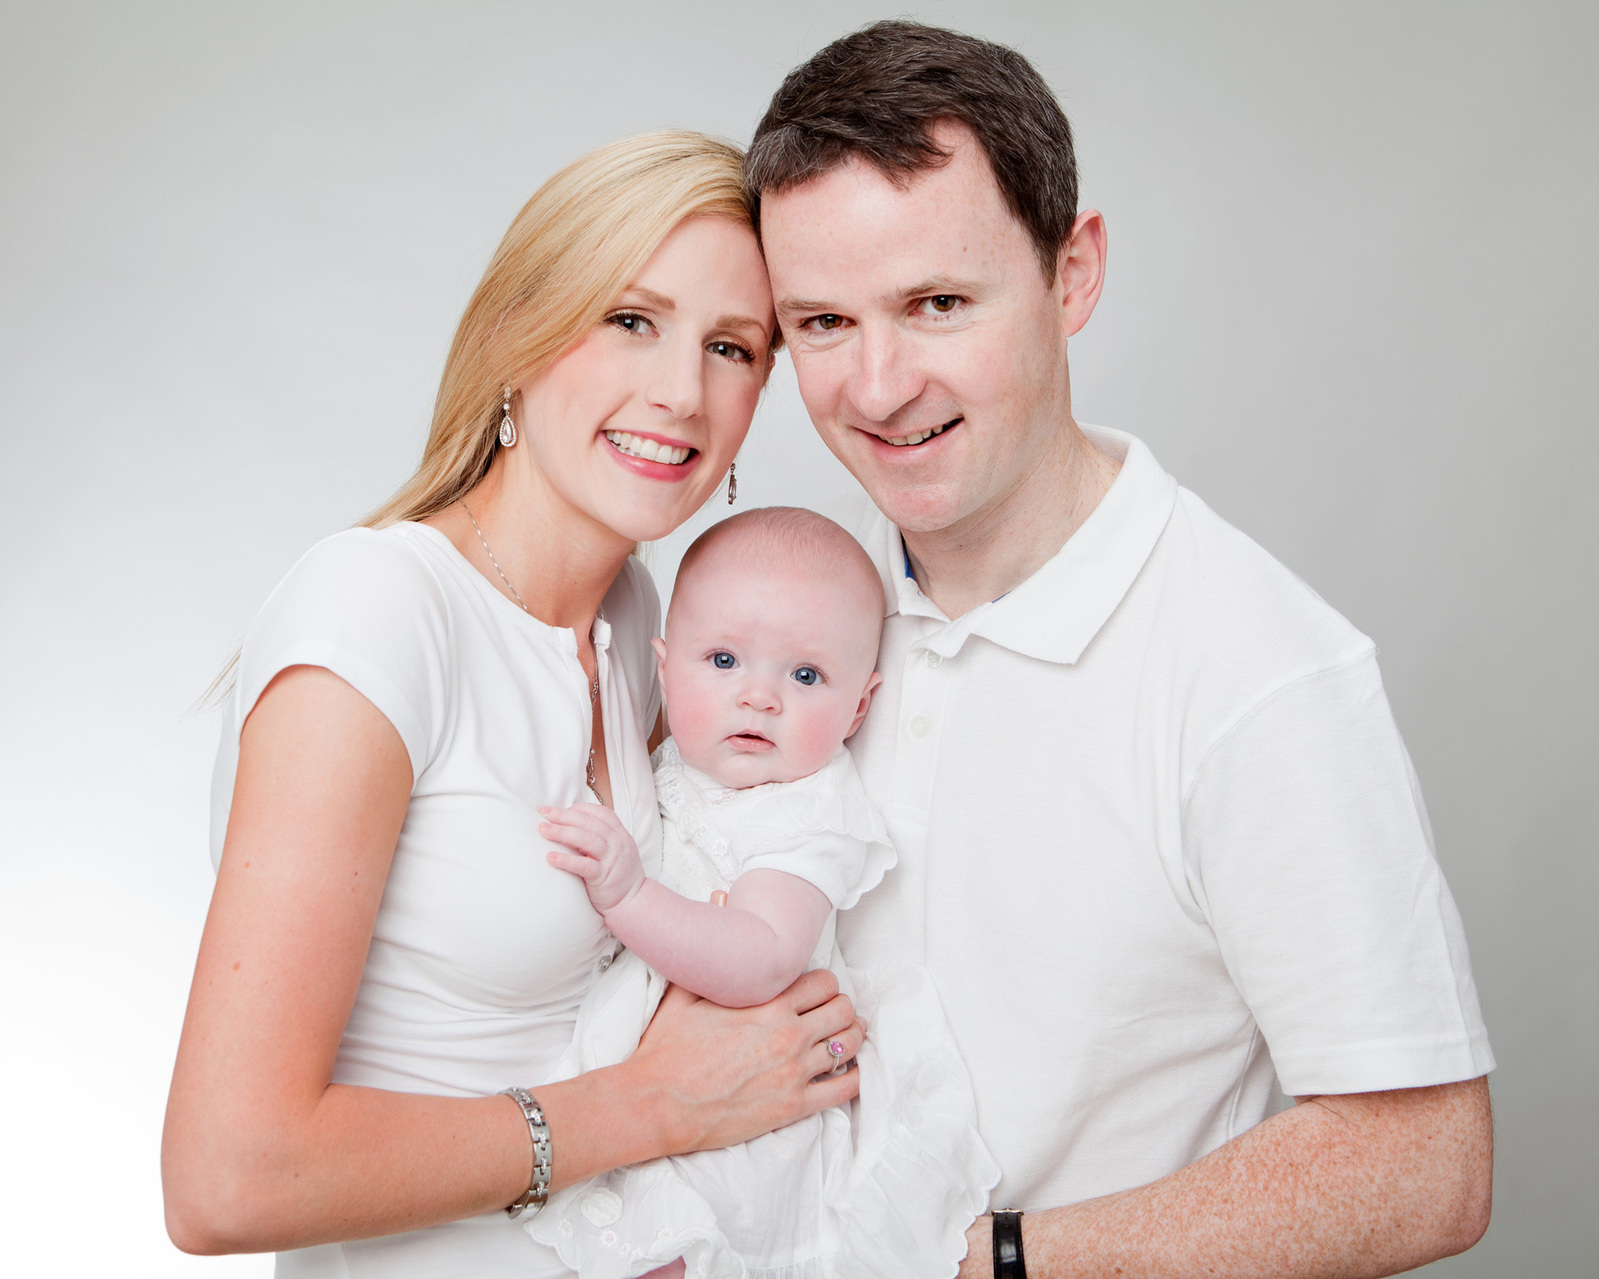 Family portrait of Mom, Dad and young baby in professional photo studio in Dublin white background